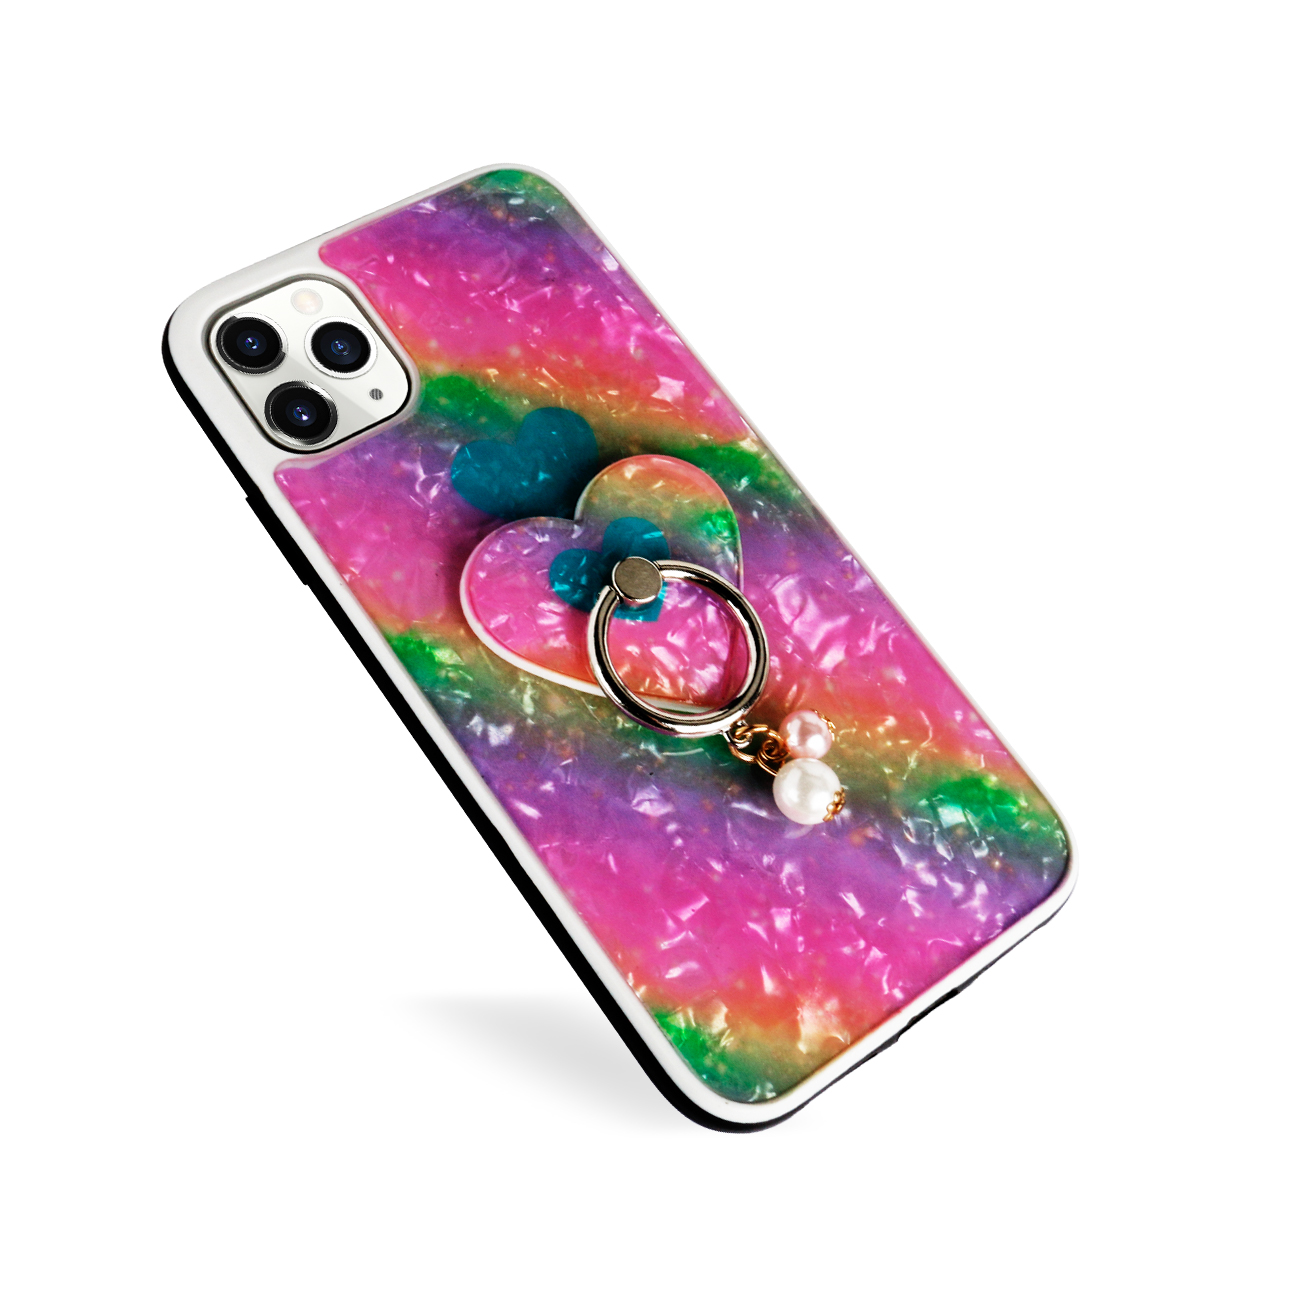 Heart Design RING Stand Fashion Case for iPhone 11 6.1 (Rainbow)